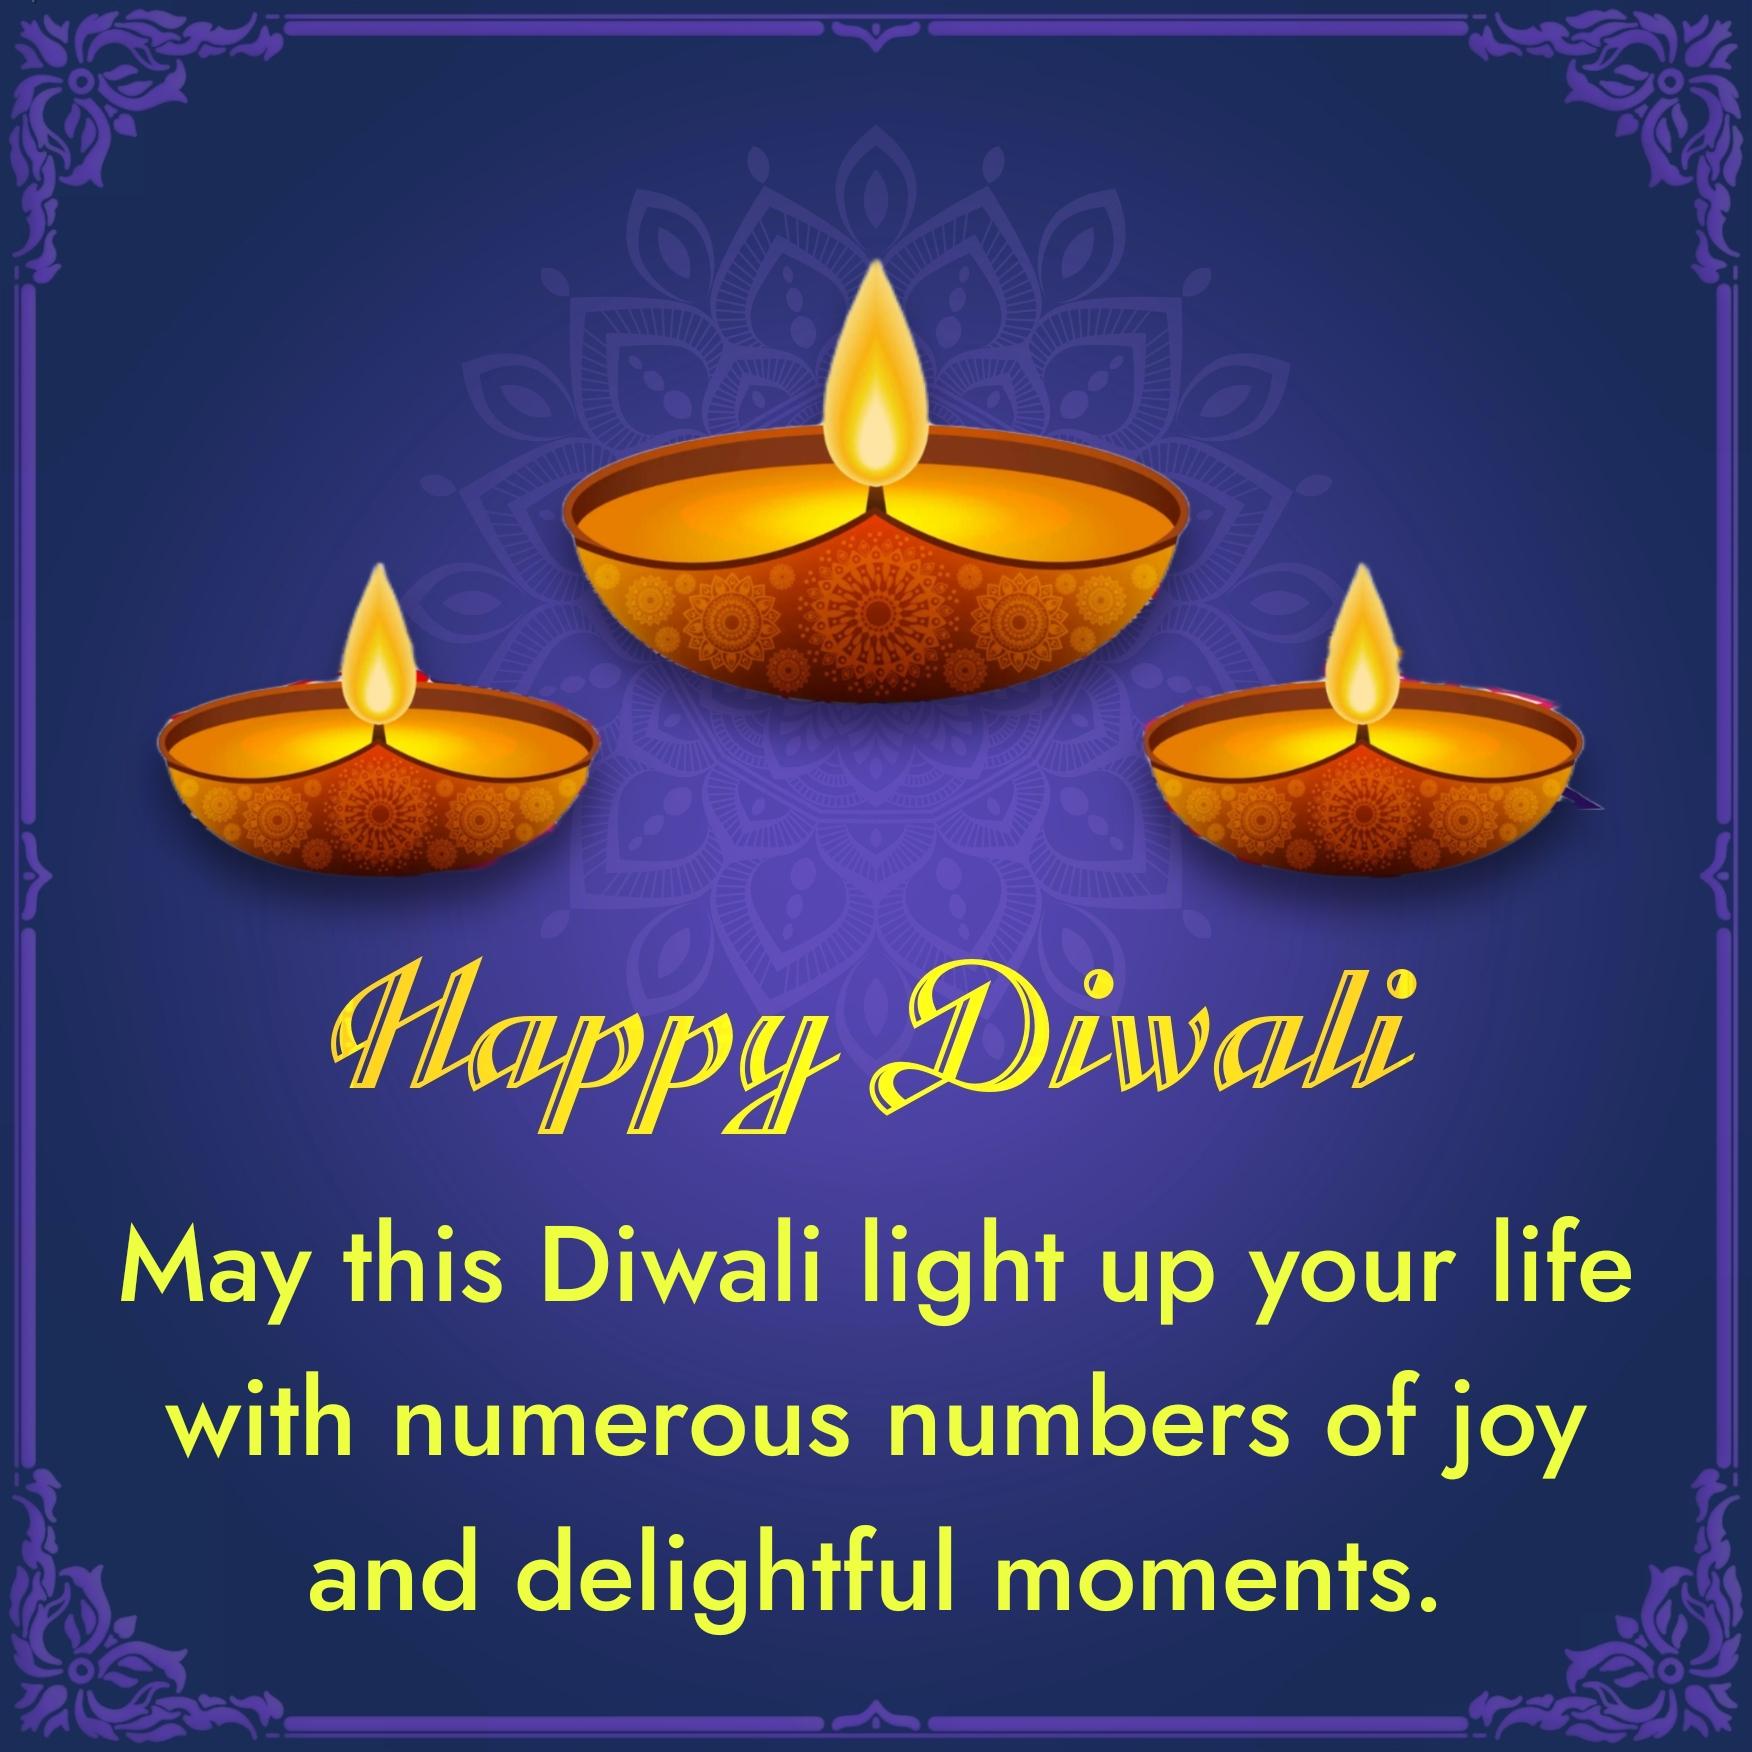 May this Diwali light up your life with numerous numbers of joy